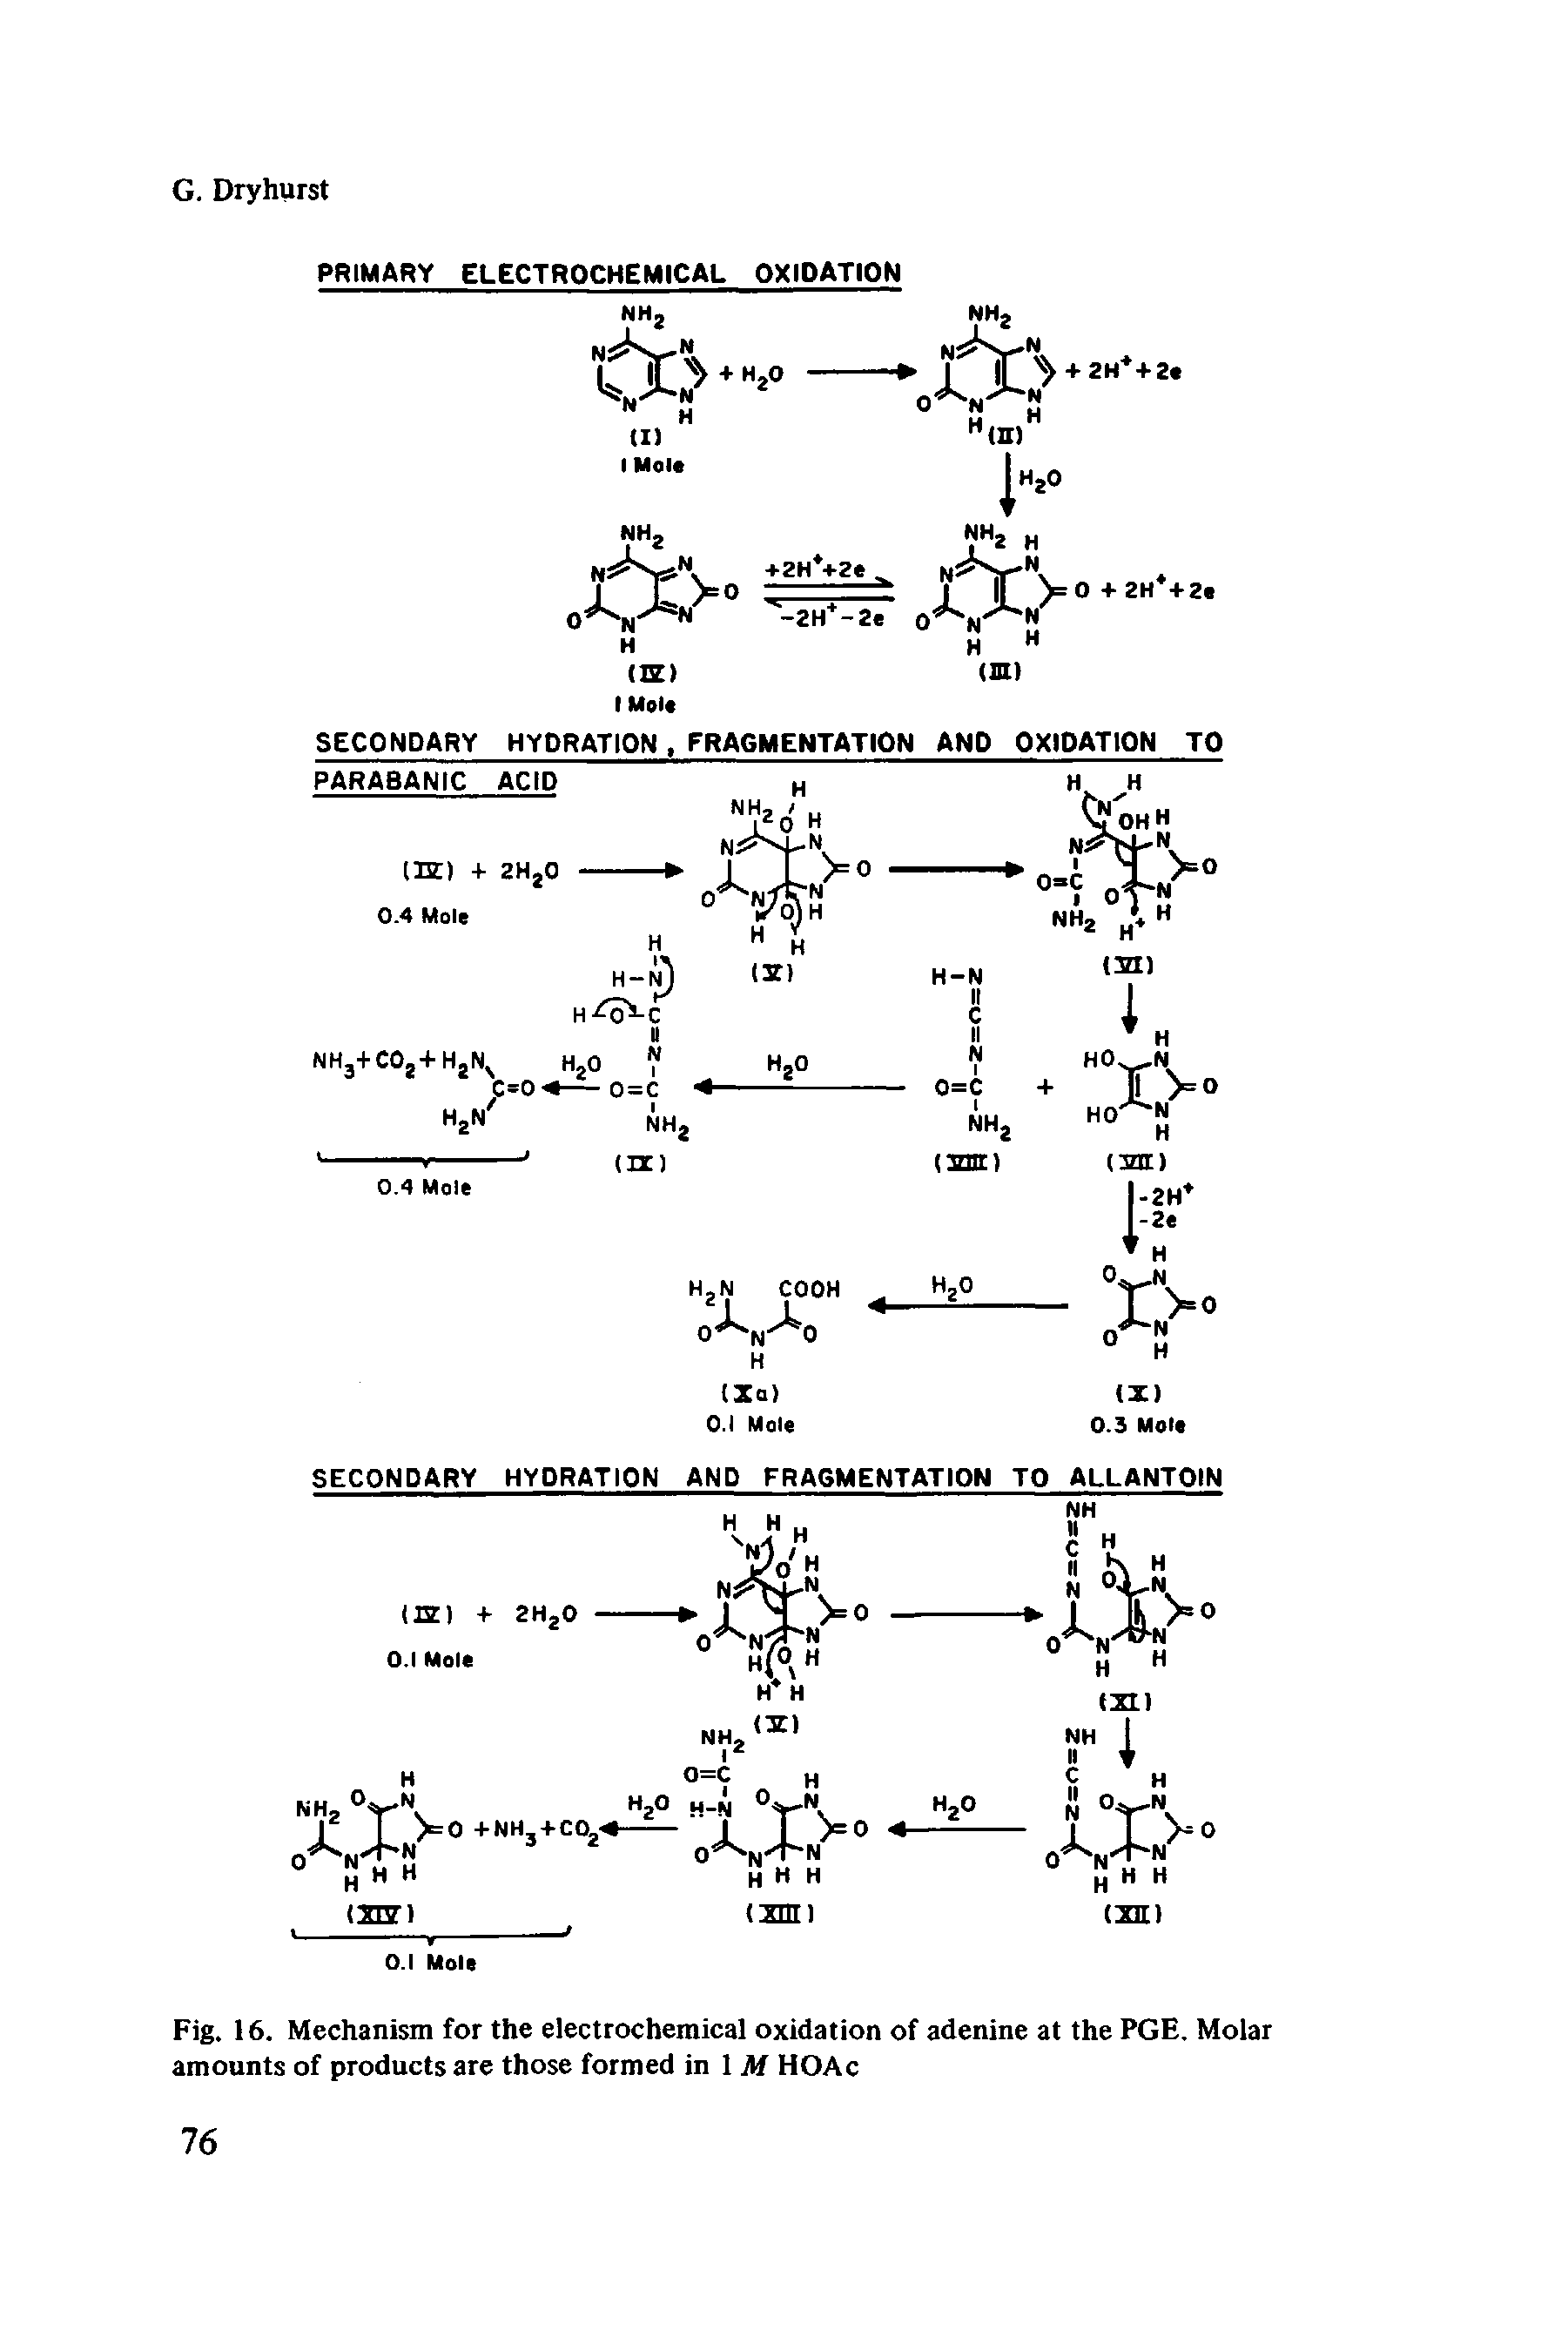 Fig. 16. Mechanism for the electrochemical oxidation of adenine at the PGE. Molar amounts of products are those formed in 1 M HOAc...